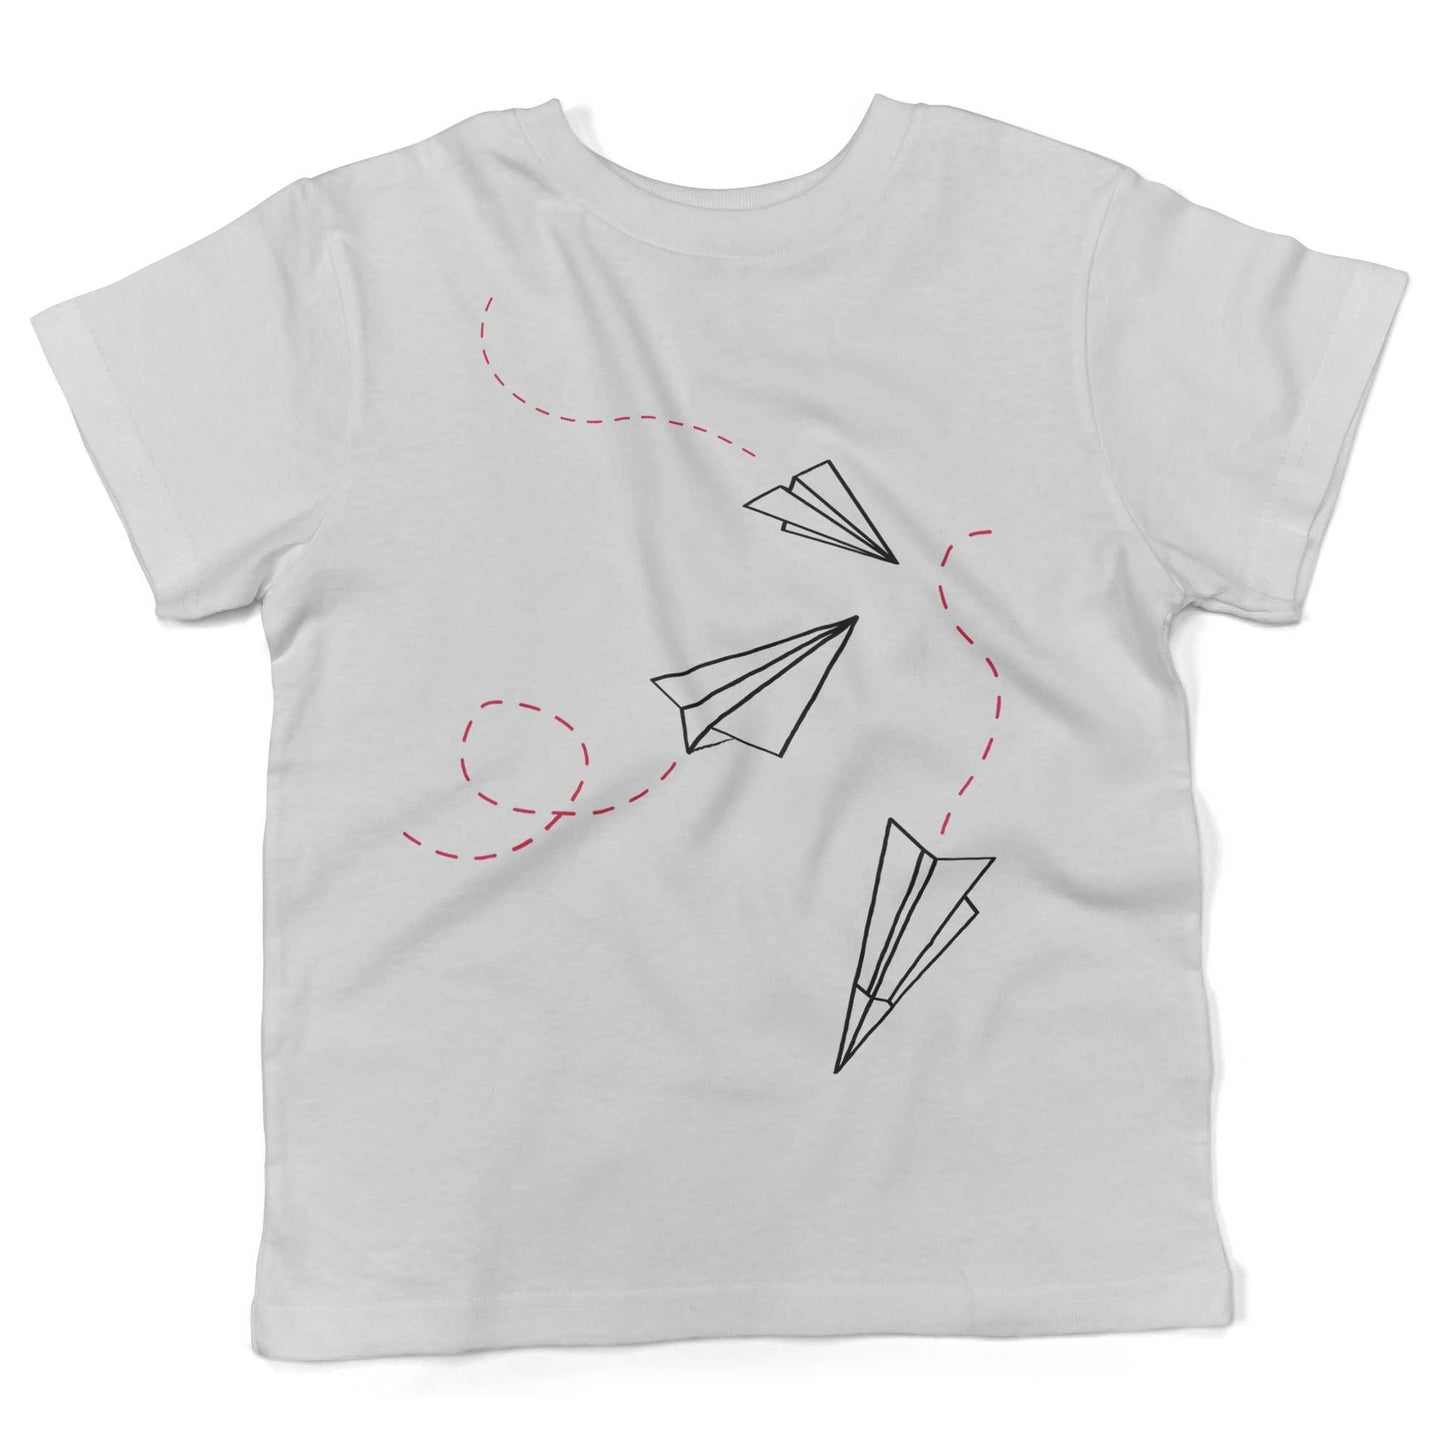 Paper Airplanes Toddler Shirt-White-2T